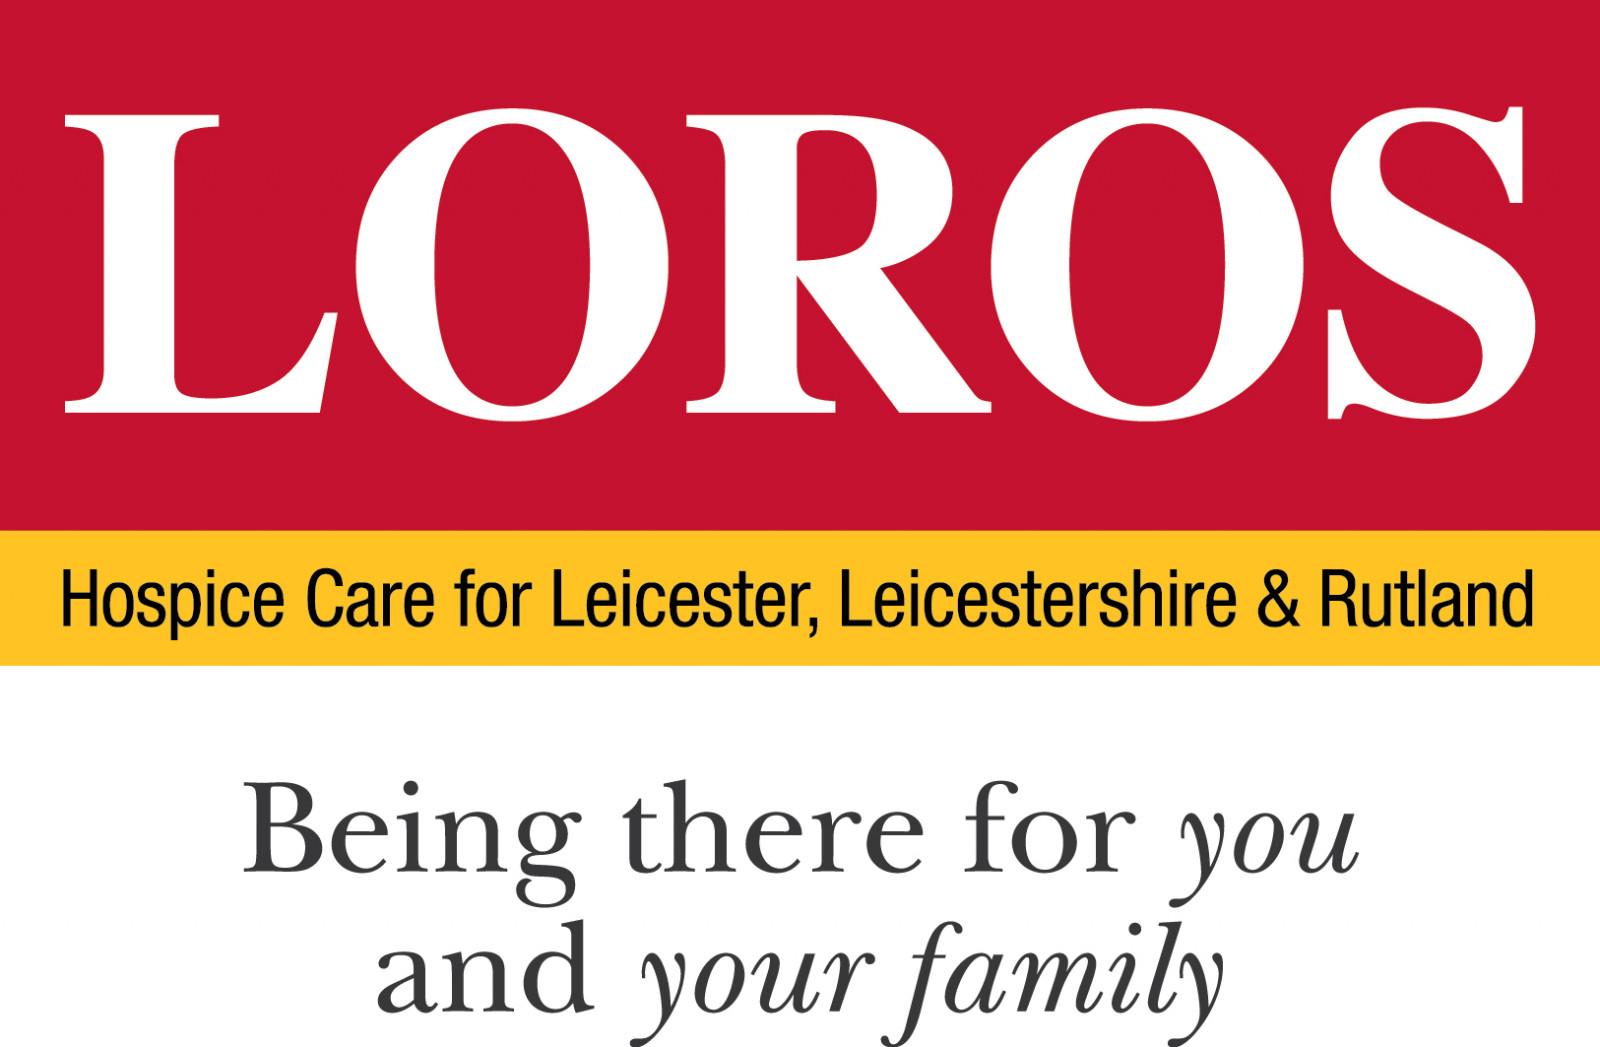 Maxshow Limited pledges support for LOROS Hospice